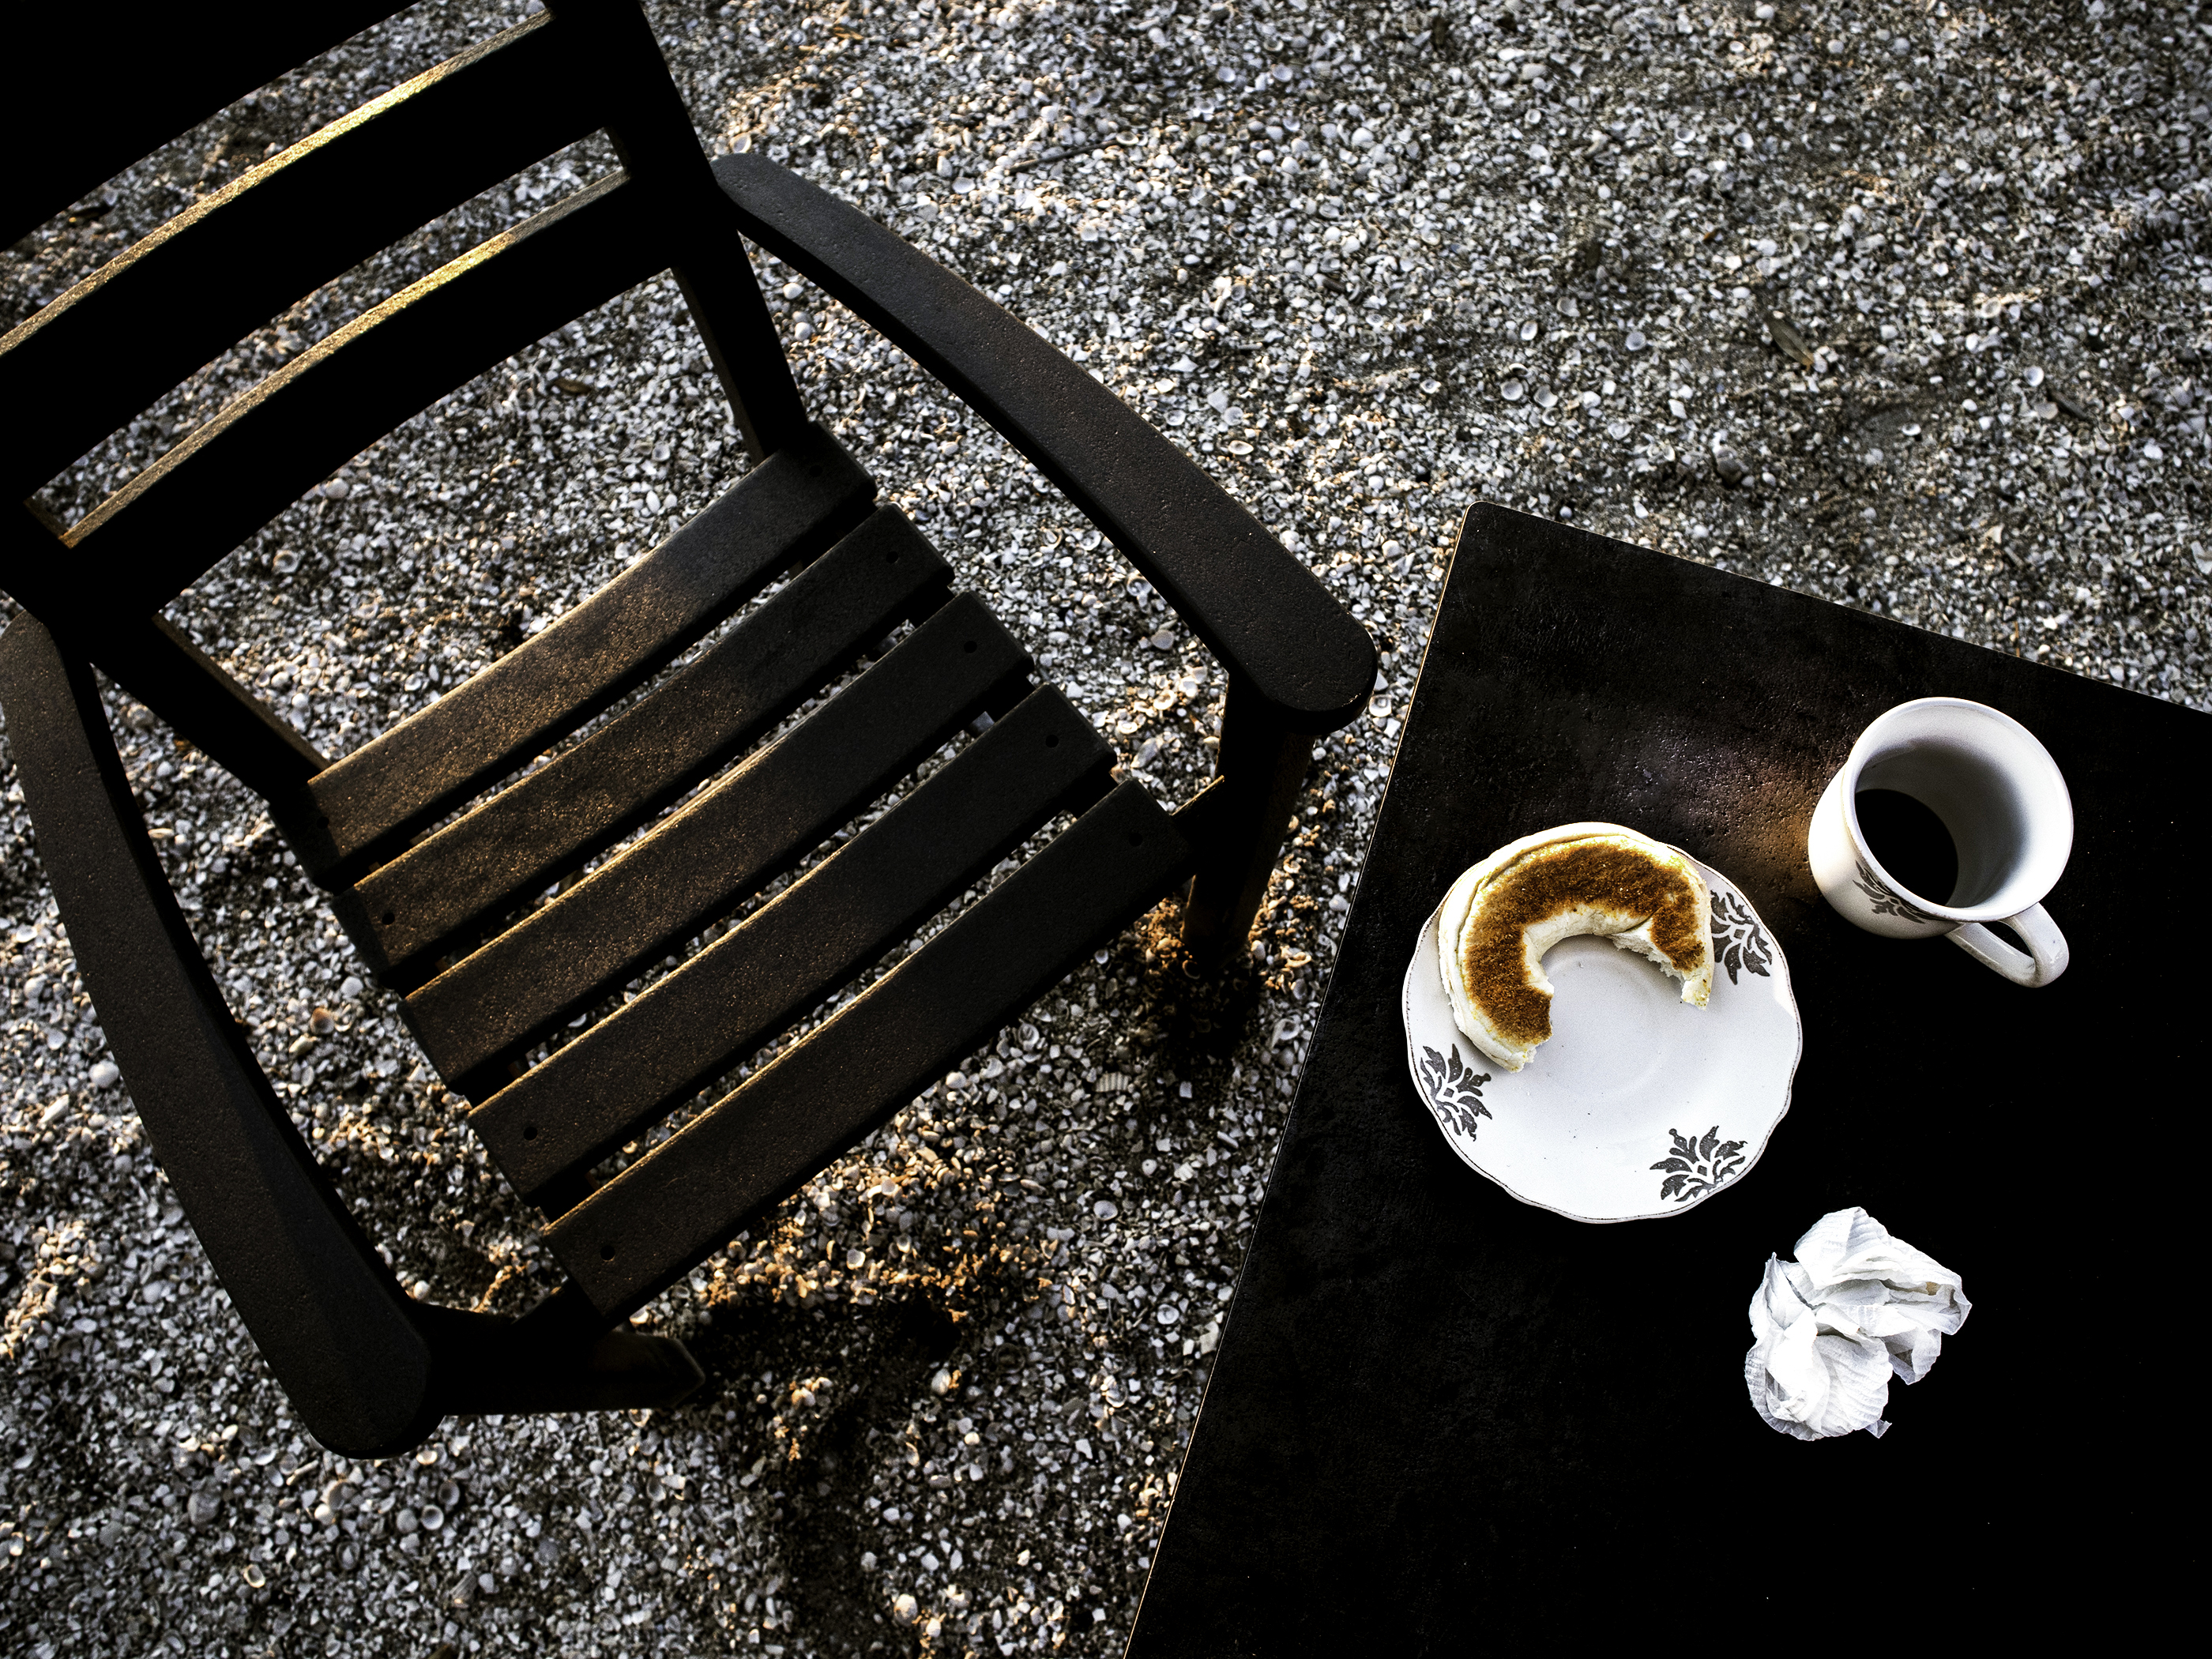 Table and chair seen from above with coffee, bagel, and crumpled napkin